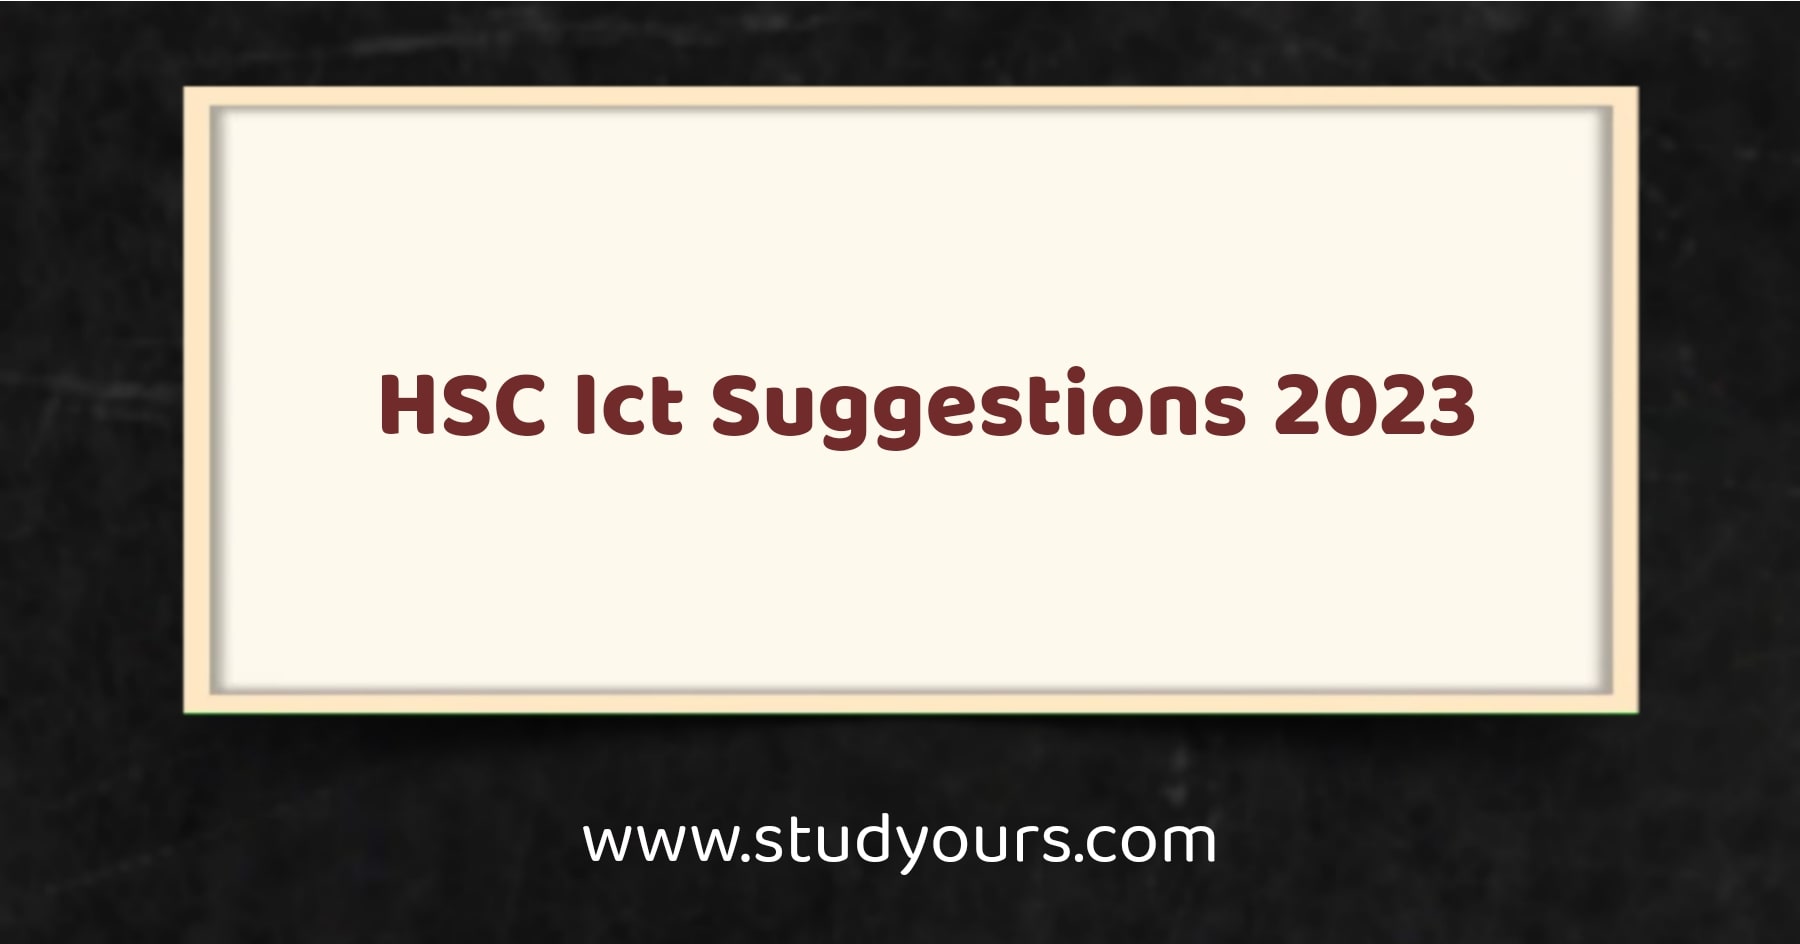 HSC Ict Suggestions 2023